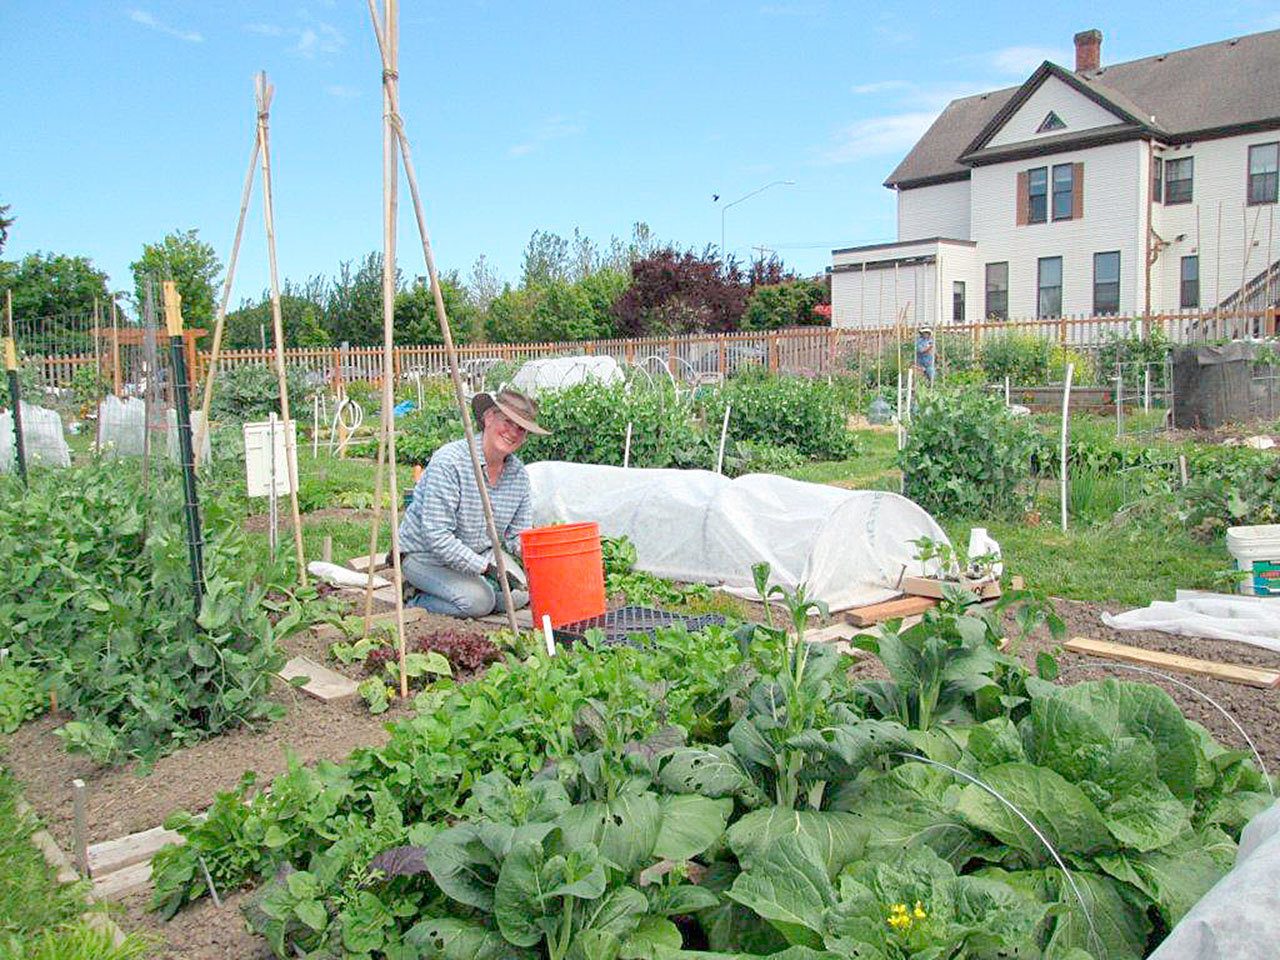 Clallam County Master Gardener Jan Bartron tends to garden plots at the Fifth Street Community Garden in Port Angeles in 2013. (Clallam County Master Gardeners)